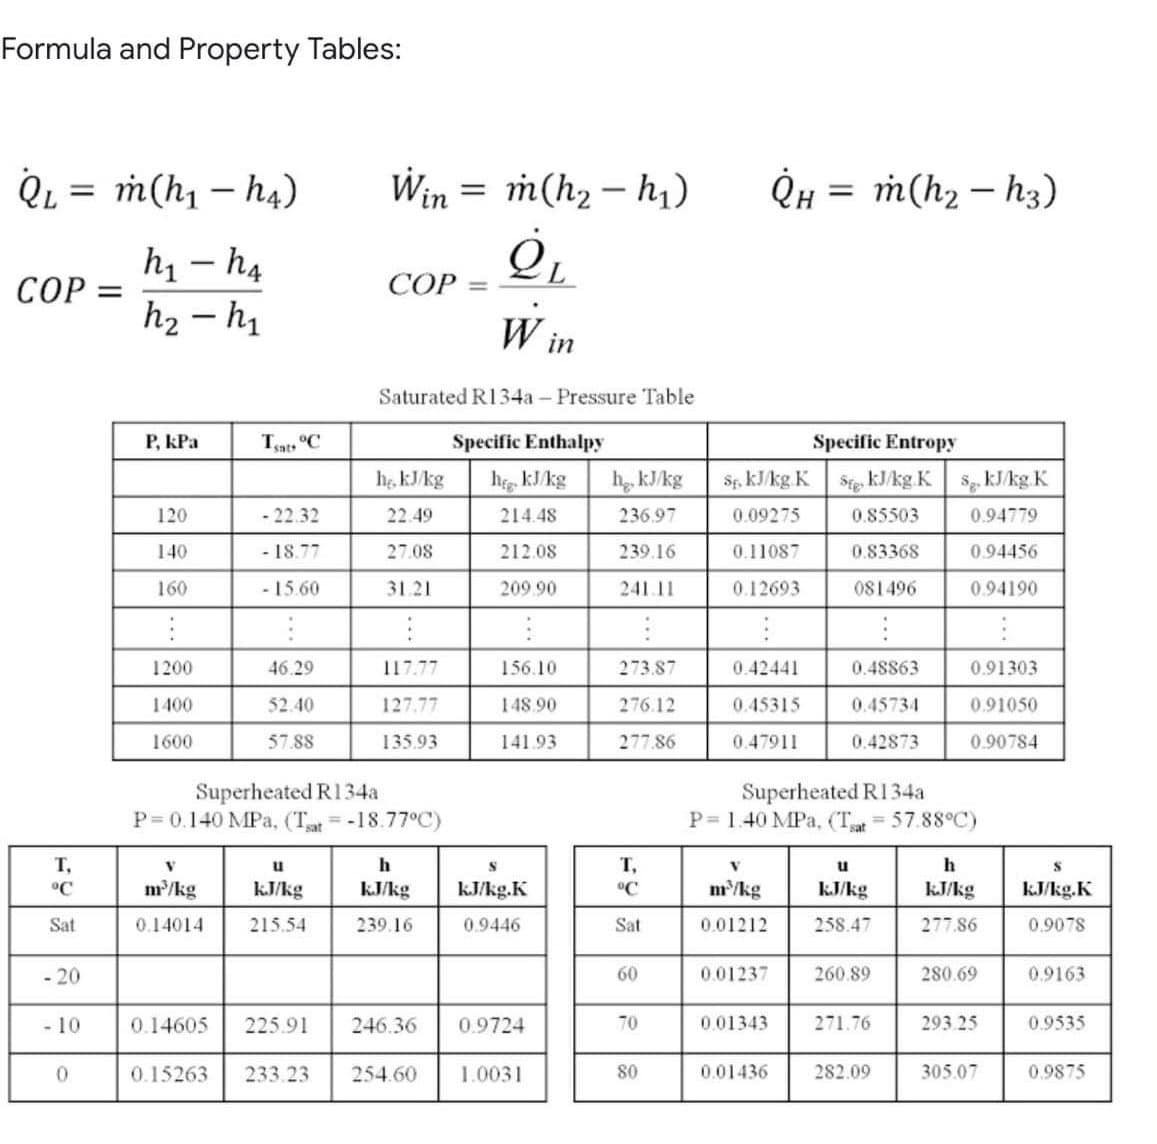 Formula and Property Tables:
QL = m(h1 – h4)
Win = m(h2 – h)
QH = m(h2 – h3)
h1 - h4
COP =
h2 – h
СОР
in
Saturated R134a - Pressure Table
P, kPa
Tat °C
Specific Enthalpy
Specific Entropy
he, kJ/kg
h kJ/kg
h kJ/kg
Sp. kJ/kg K
Stg. kJ/kg.K
$. kJ/kg K
120
- 22.32
22.49
214.48
236.97
0.09275
0.85503
0.94779
140
- 18.77
27.08
212.08
239.16
0.11087
0.83368
0.94456
160
- 15.60
31.21
209.90
241.11
0.12693
081496
0.94190
1200
46.29
117.77
156.10
273.87
0.42441
0.48863
0.91303
1400
52.40
127.77
148.90
276.12
0.45315
0.45734
0.91050
1600
57.88
135.93
141.93
277.86
0.47911
0.42873
0.90784
Superheated R134a
P= 0.140 MPa, (Tat=-18.77°C)
Superheated RI34a
P= 1.40 MPa, (Tat = 57.88°C)
T,
u
h
T,
u
h
°C
n/kg
kJ/kg
kJ/kg
kJ/kg.K
°C
m/kg
kJ/kg
kJ/kg
kJ/kg.K
Sat
0.14014
215.54
239.16
0.9446
Sat
0.01212
258.47
277.86
0.9078
- 20
60
0.01237
260.89
280.69
0.9163
- 10
0.14605
225.91
246.36
0.9724
70
0.01343
271.76
293.25
0.9535
0.
0.15263
233.23
254.60
1.0031
80
0.01436
282.09
305.07
0.9875
